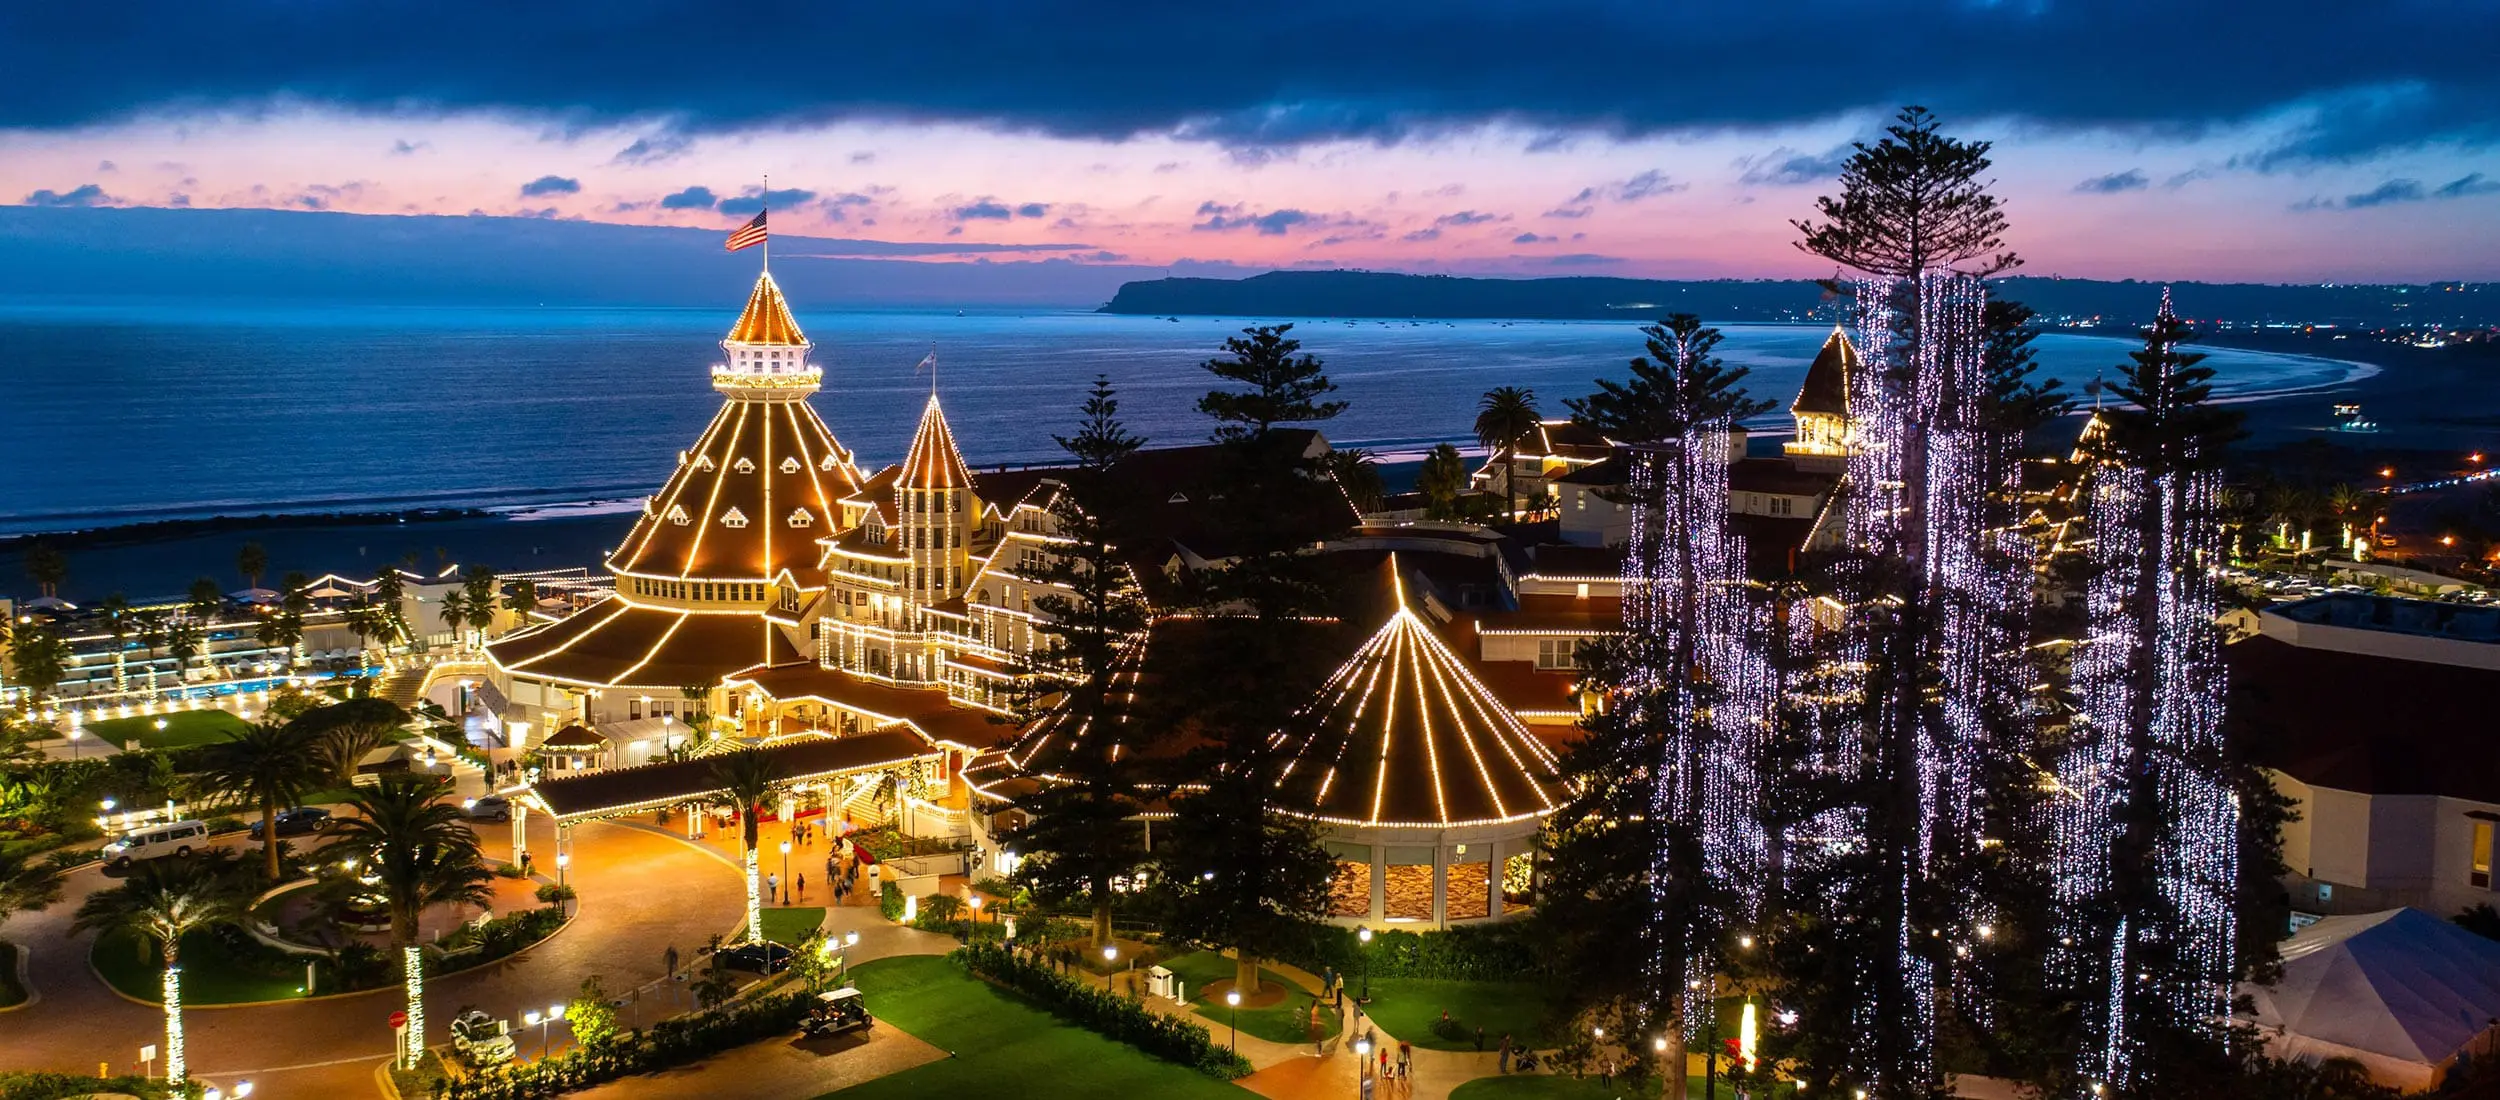 Aerial View in the Evening of Hotel del Coronado lit up with Christmas Lights